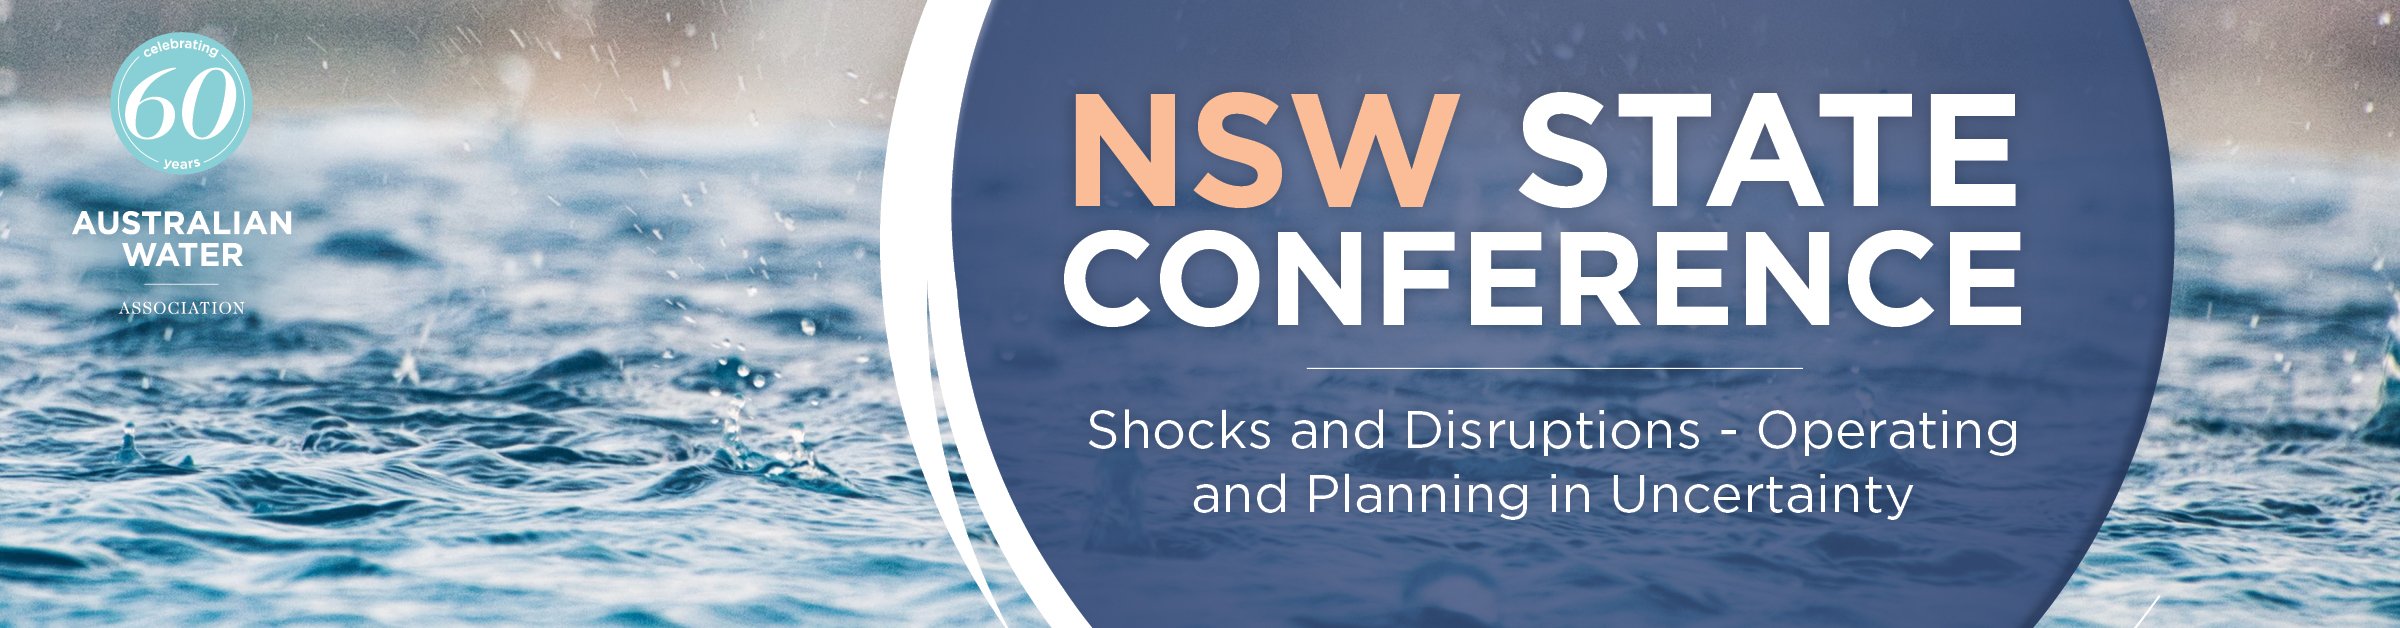 NSW State Conference_HubSpot Event Banner 1200x314px